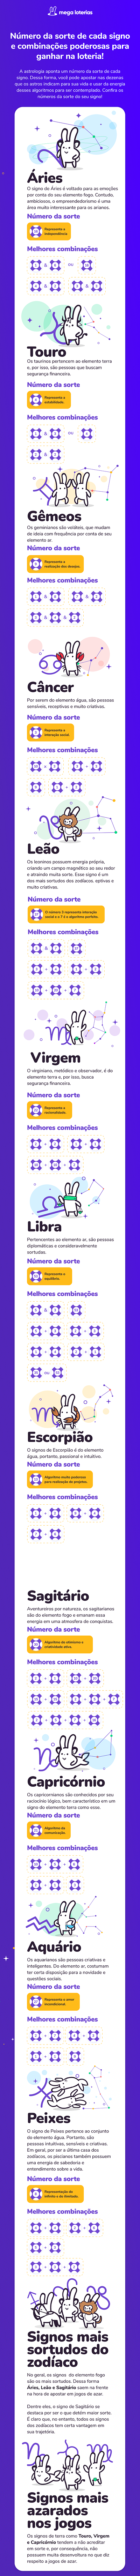 Mega Loterias | Infography astrology branding creative direction graphic design illustration infography landing page logo lottery signs vector